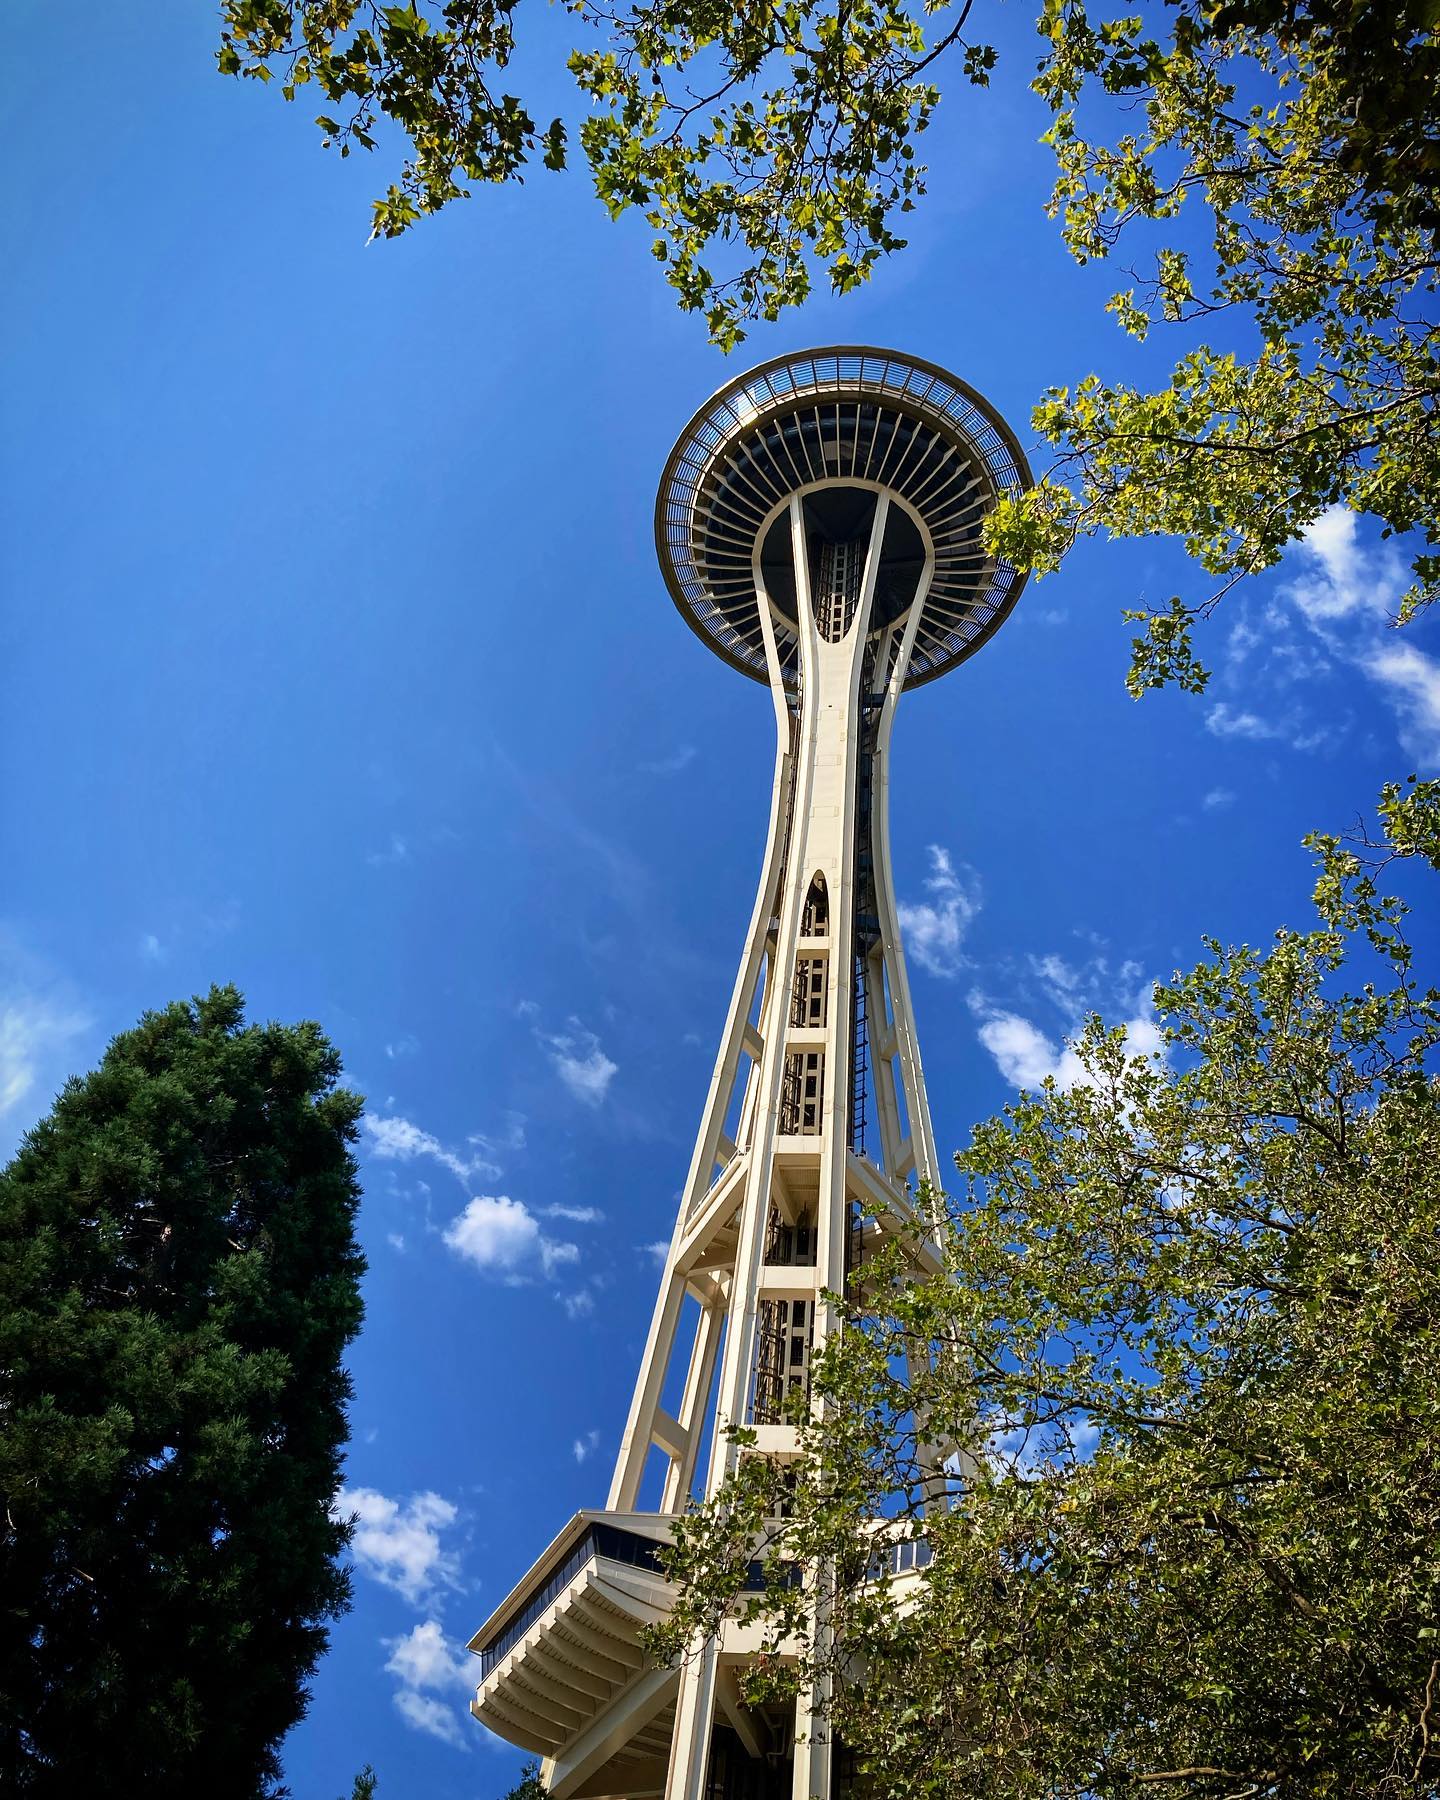 Spartan race in the morning!
_________________
#seattletourist #spaceneedle #cellphotography #idontlivehere